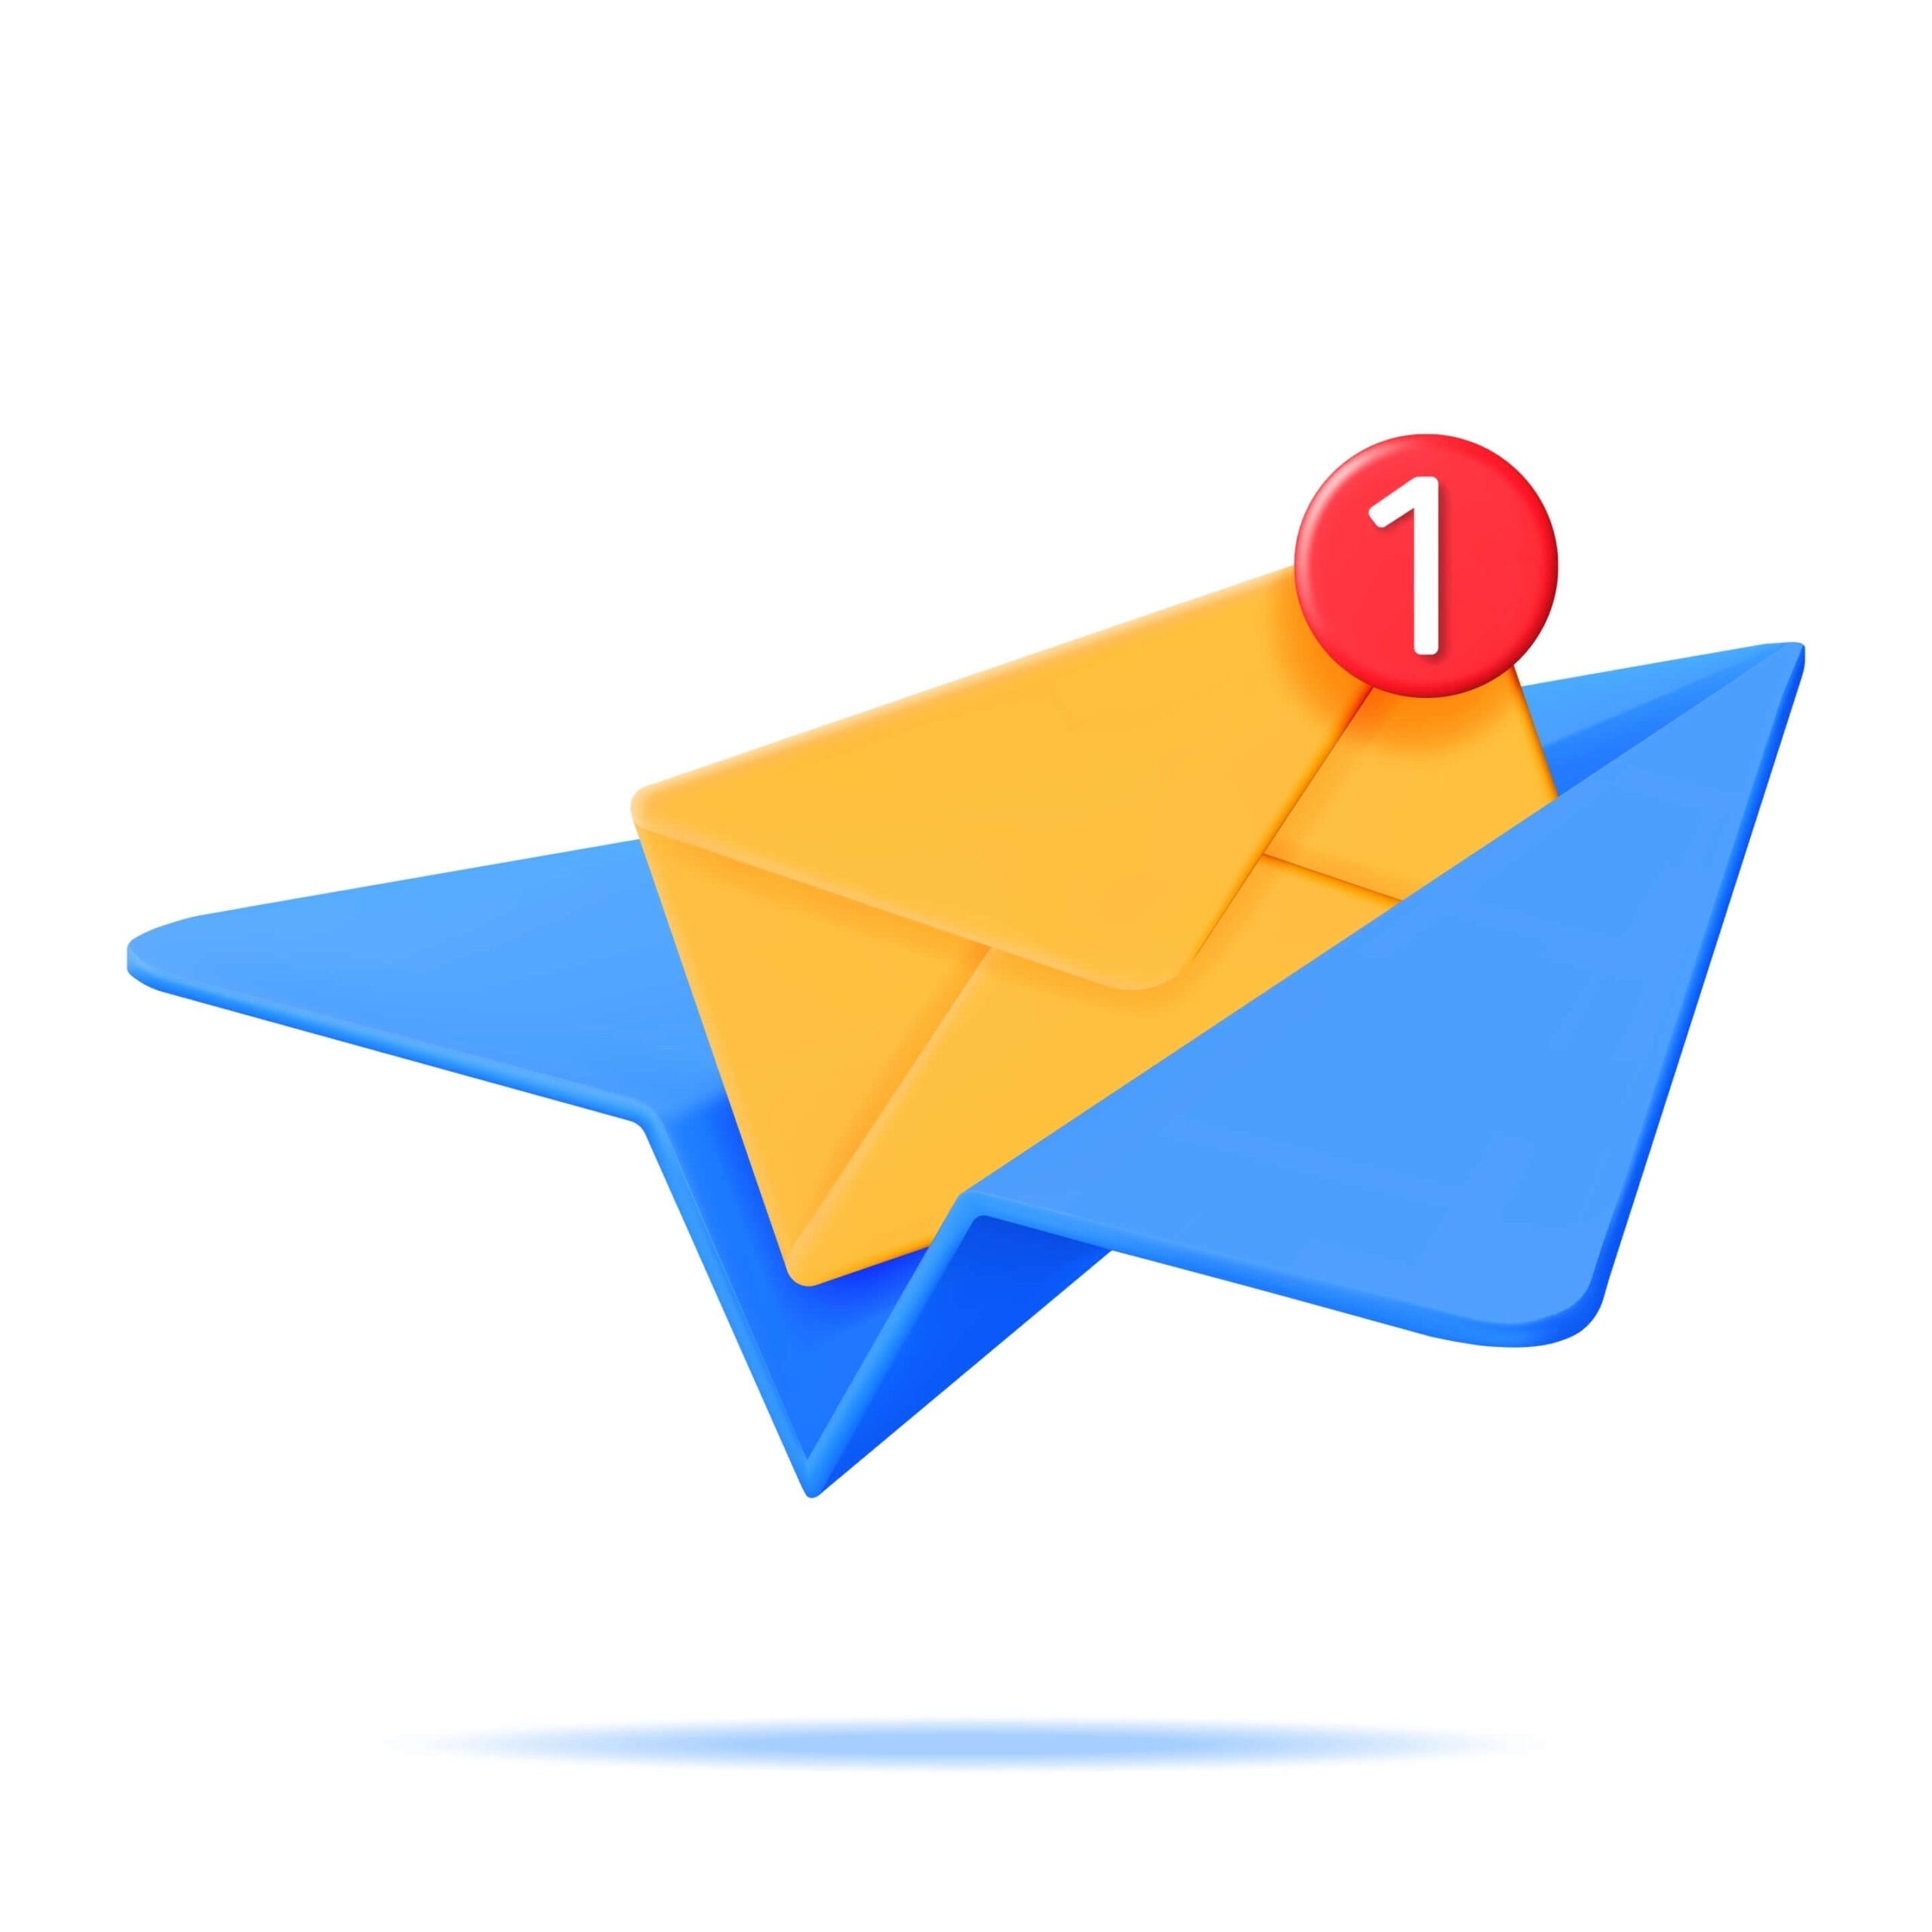 A yellow envelope that has a red notification circle is sitting on a blue paper airplane that is flying away, represent the mail getting sent